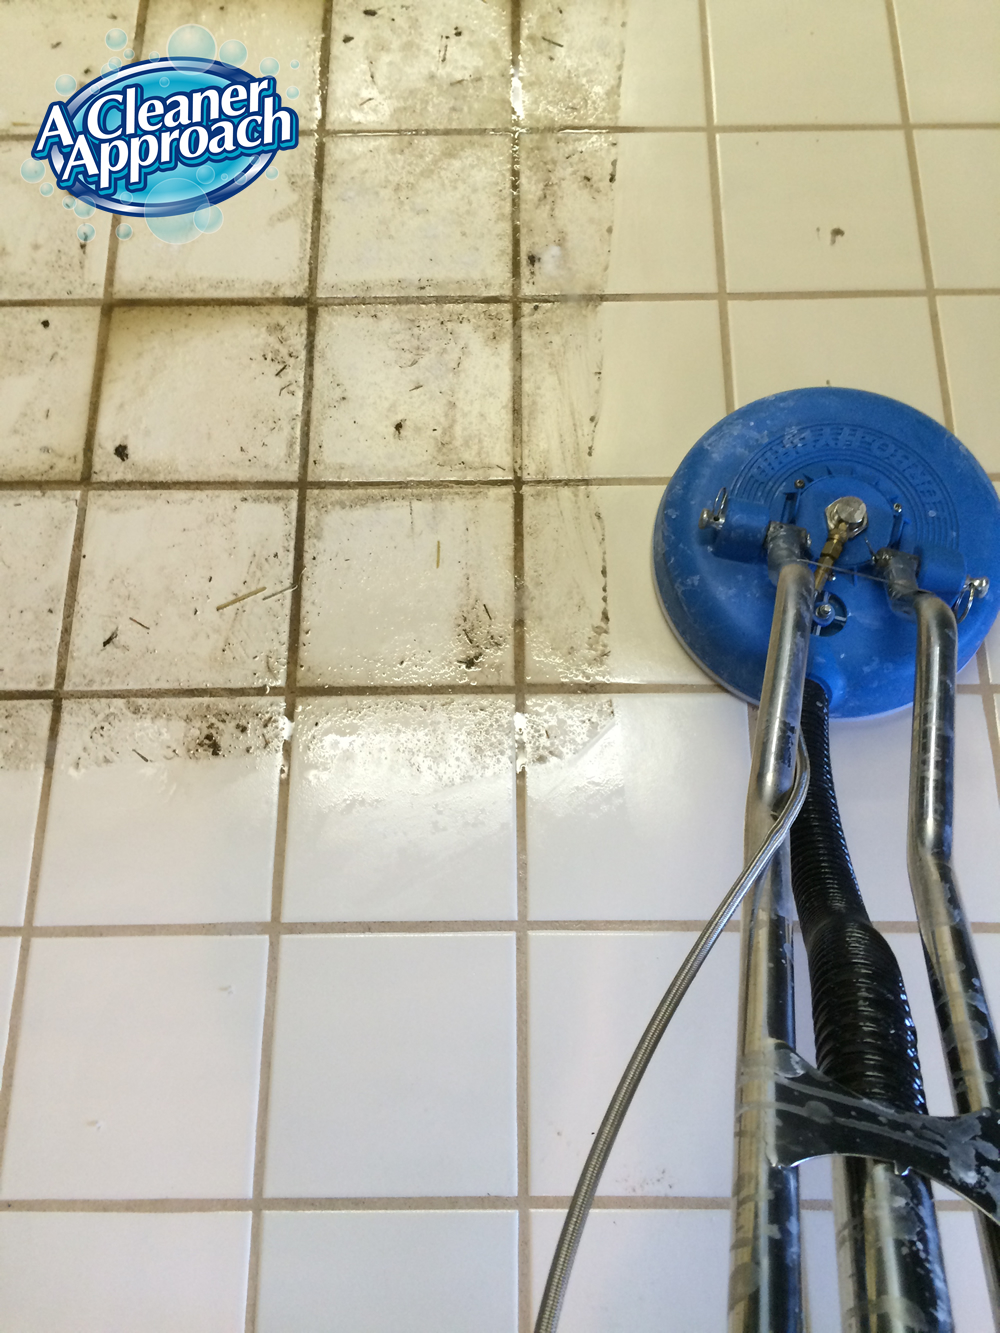 Tile & Grout Cleaning 1